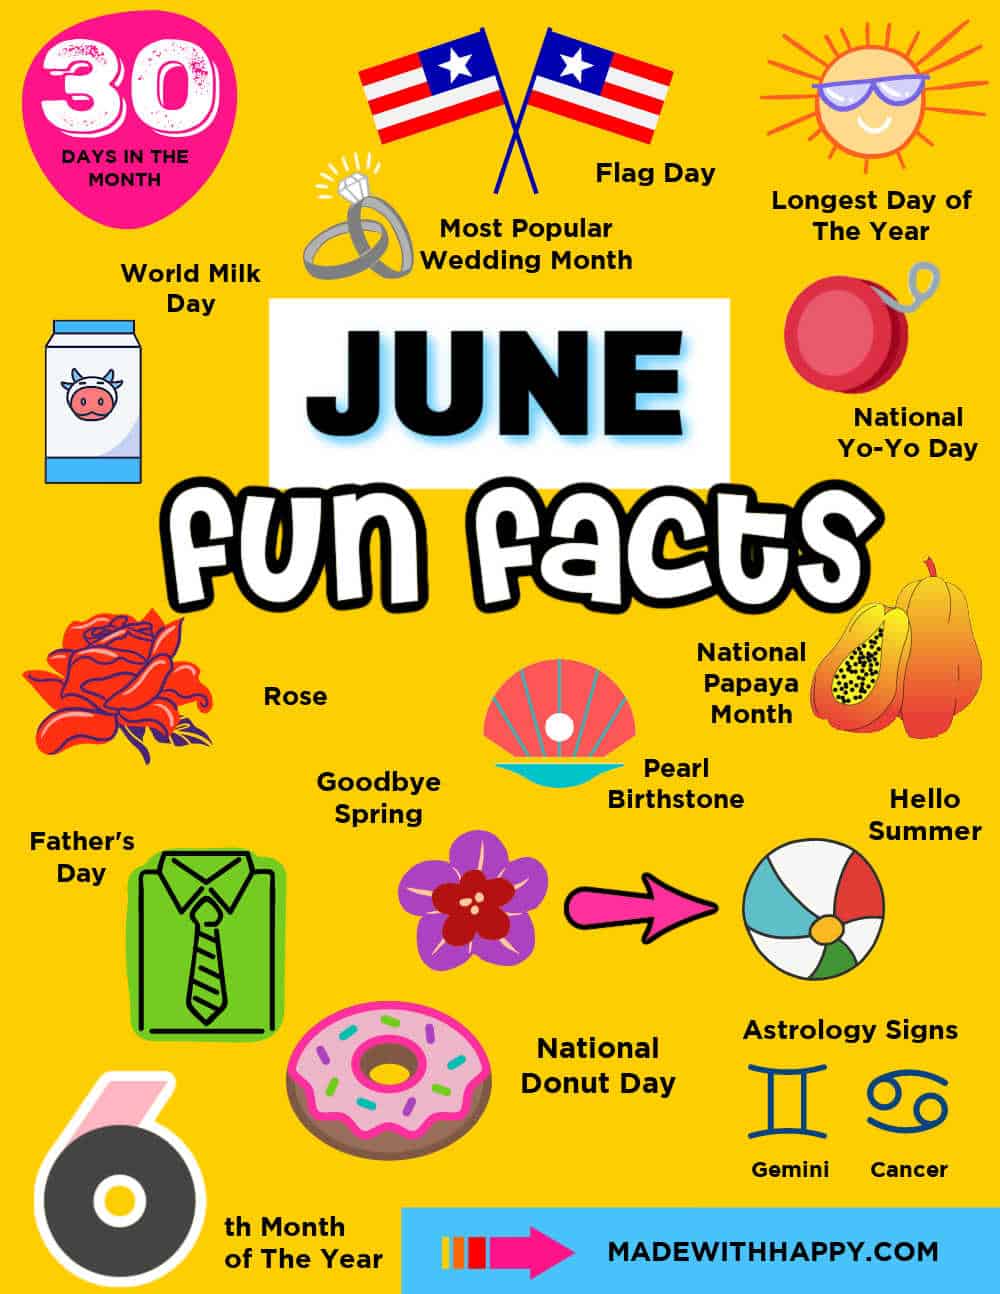 June Fun Facts Made with HAPPY